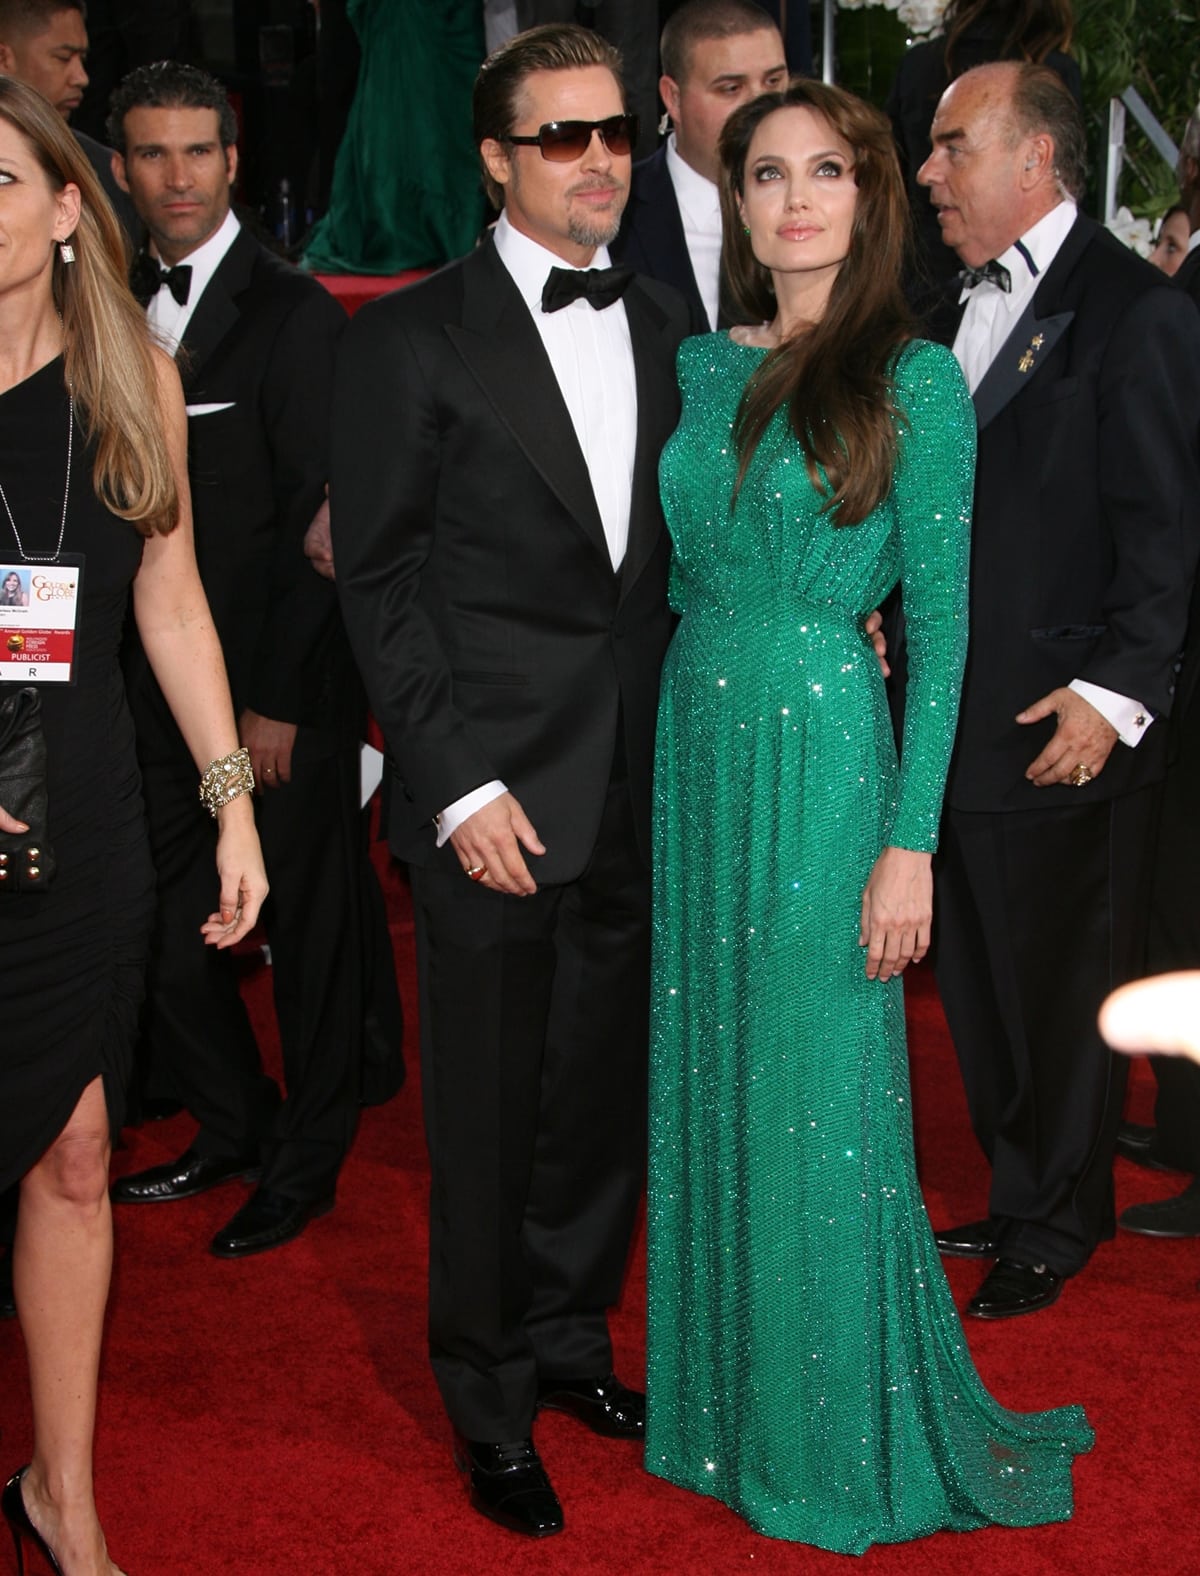 Angelina Jolie in an emerald green Atelier Versace gown with Brad Pitt in a Tom Ford tuxedo at the 68th Annual Golden Globe Awards